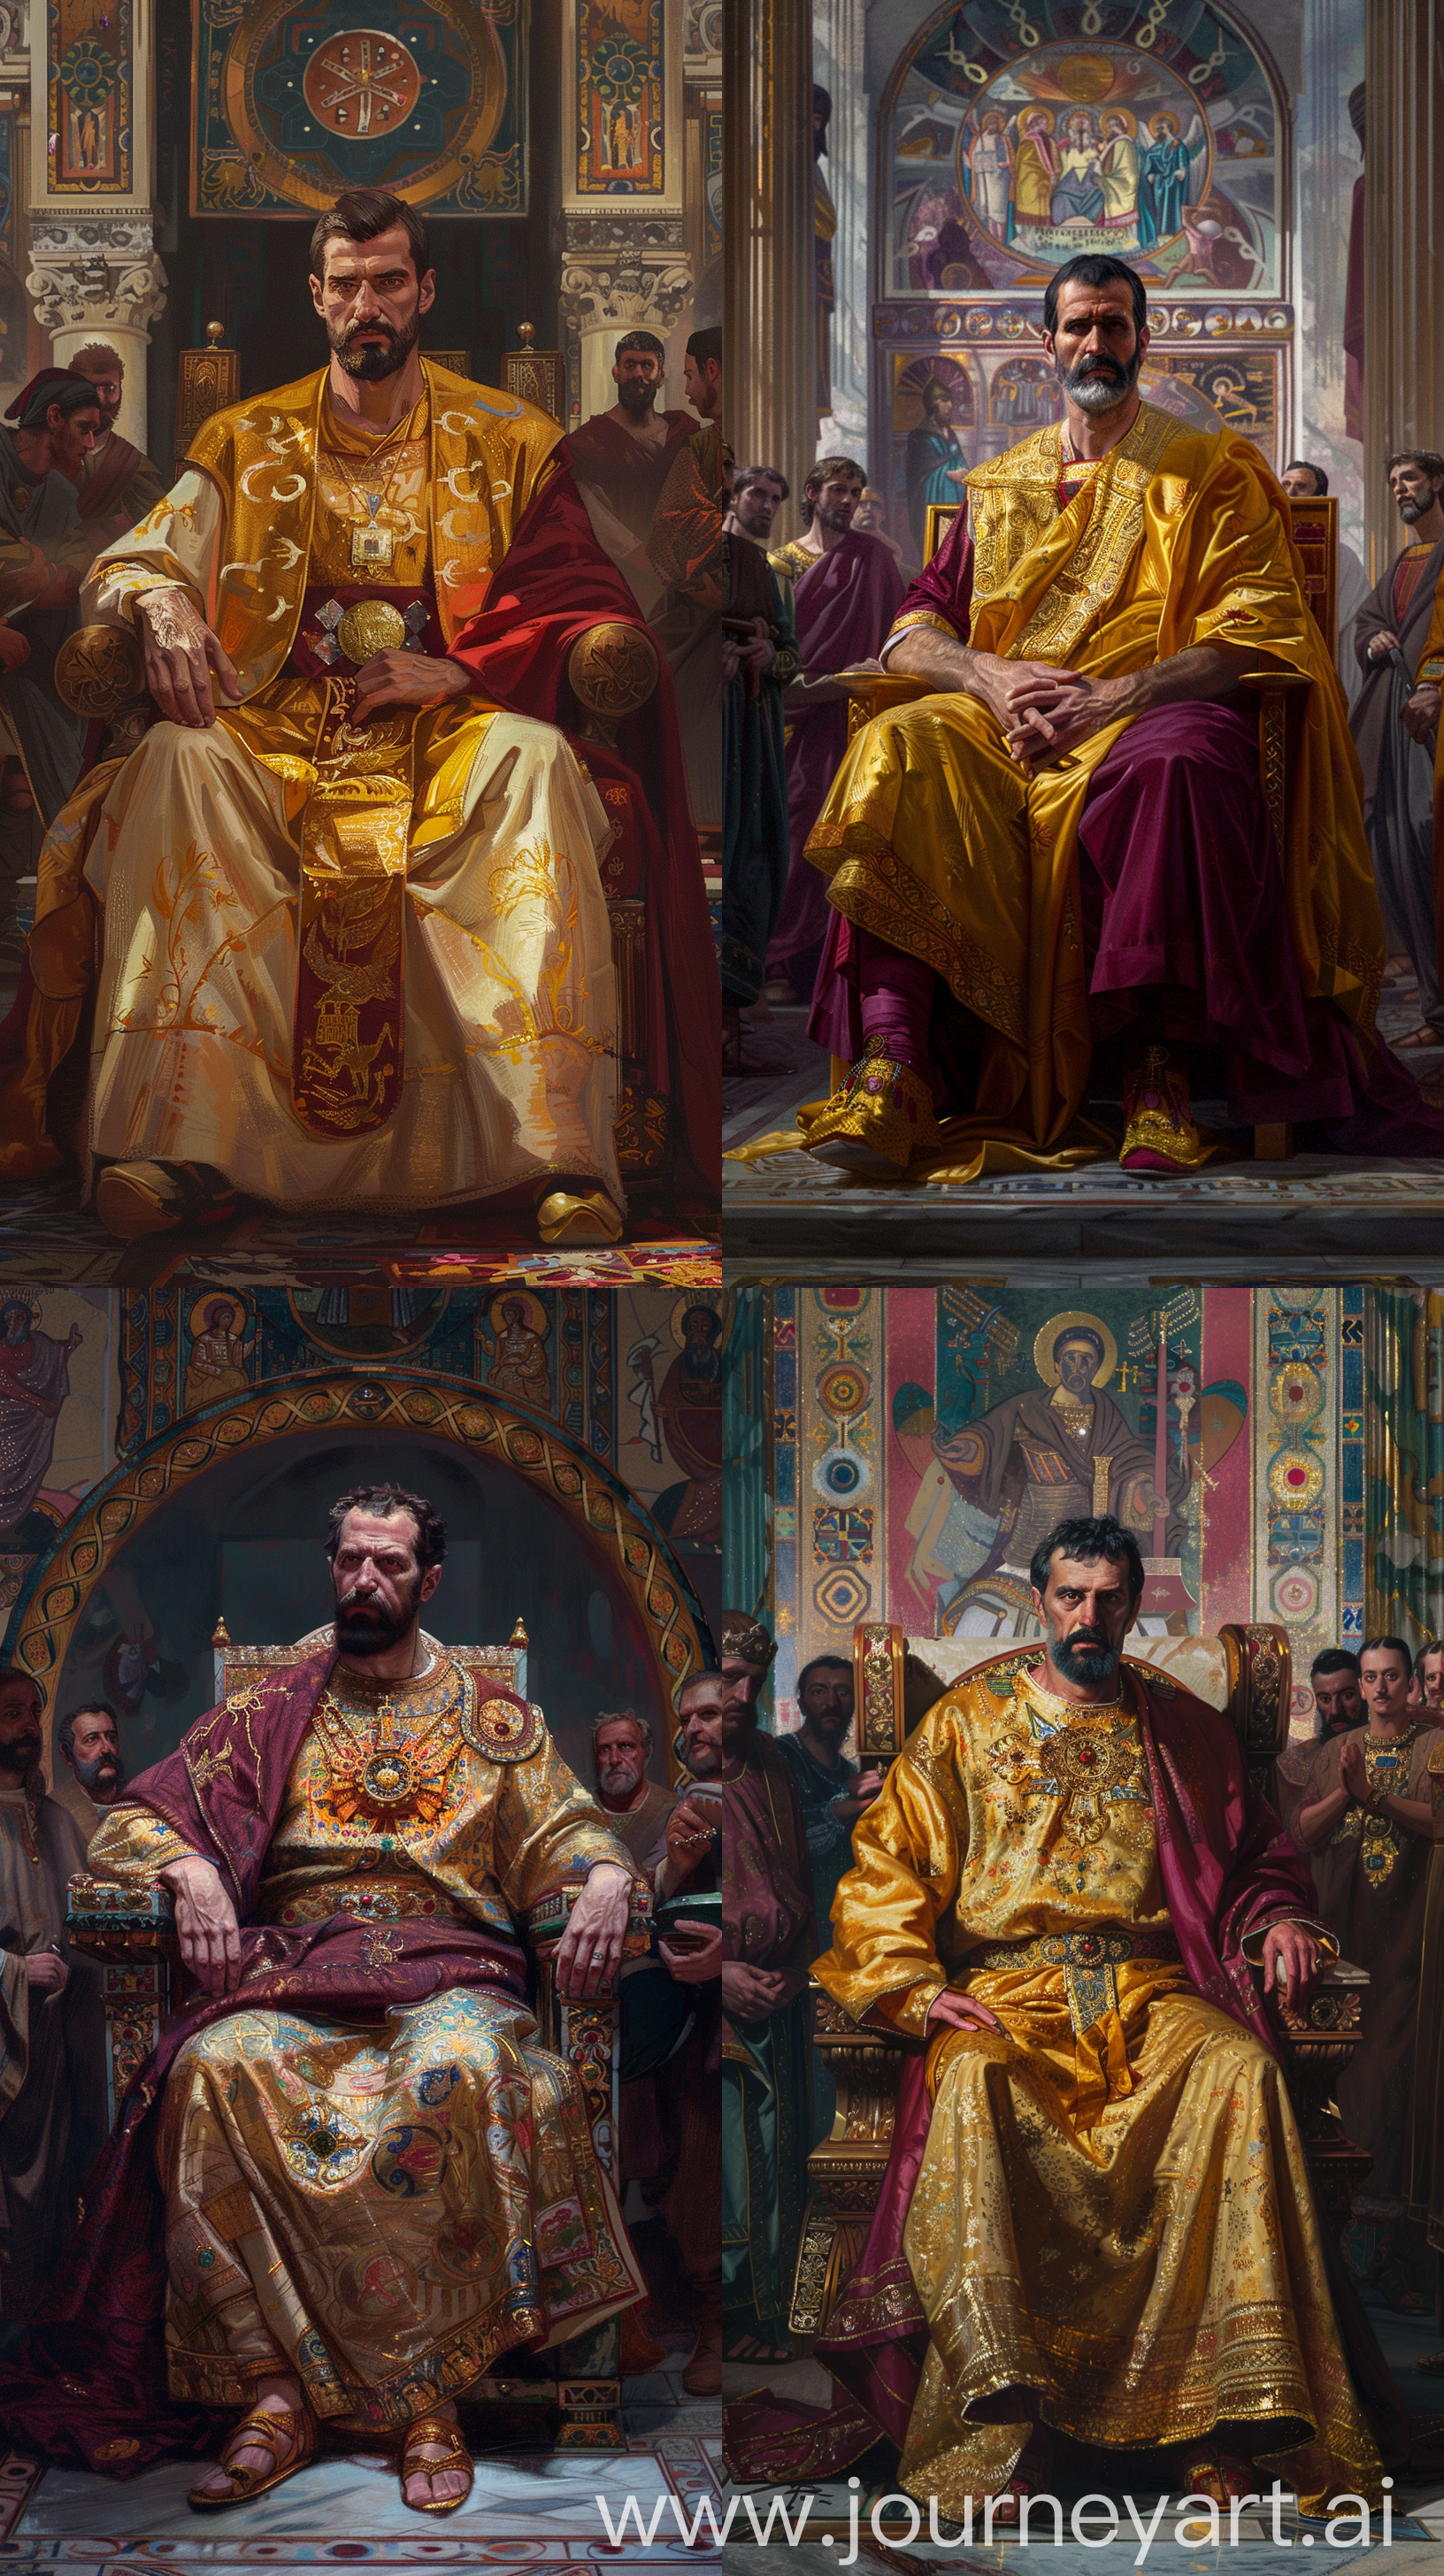 Write a portrait of Byzantine Emperor Manuel I Komnenos seated on his throne, adorned in opulent robes of gold and crimson, his expression a mix of authority and contemplation. Behind him, the grandeur of the Byzantine court unfolds, with courtiers bowing in deference and intricate mosaics shimmering in the light. Capture the essence of his reign, marked by military prowess, cultural revival, and political intrigue --ar 9:16